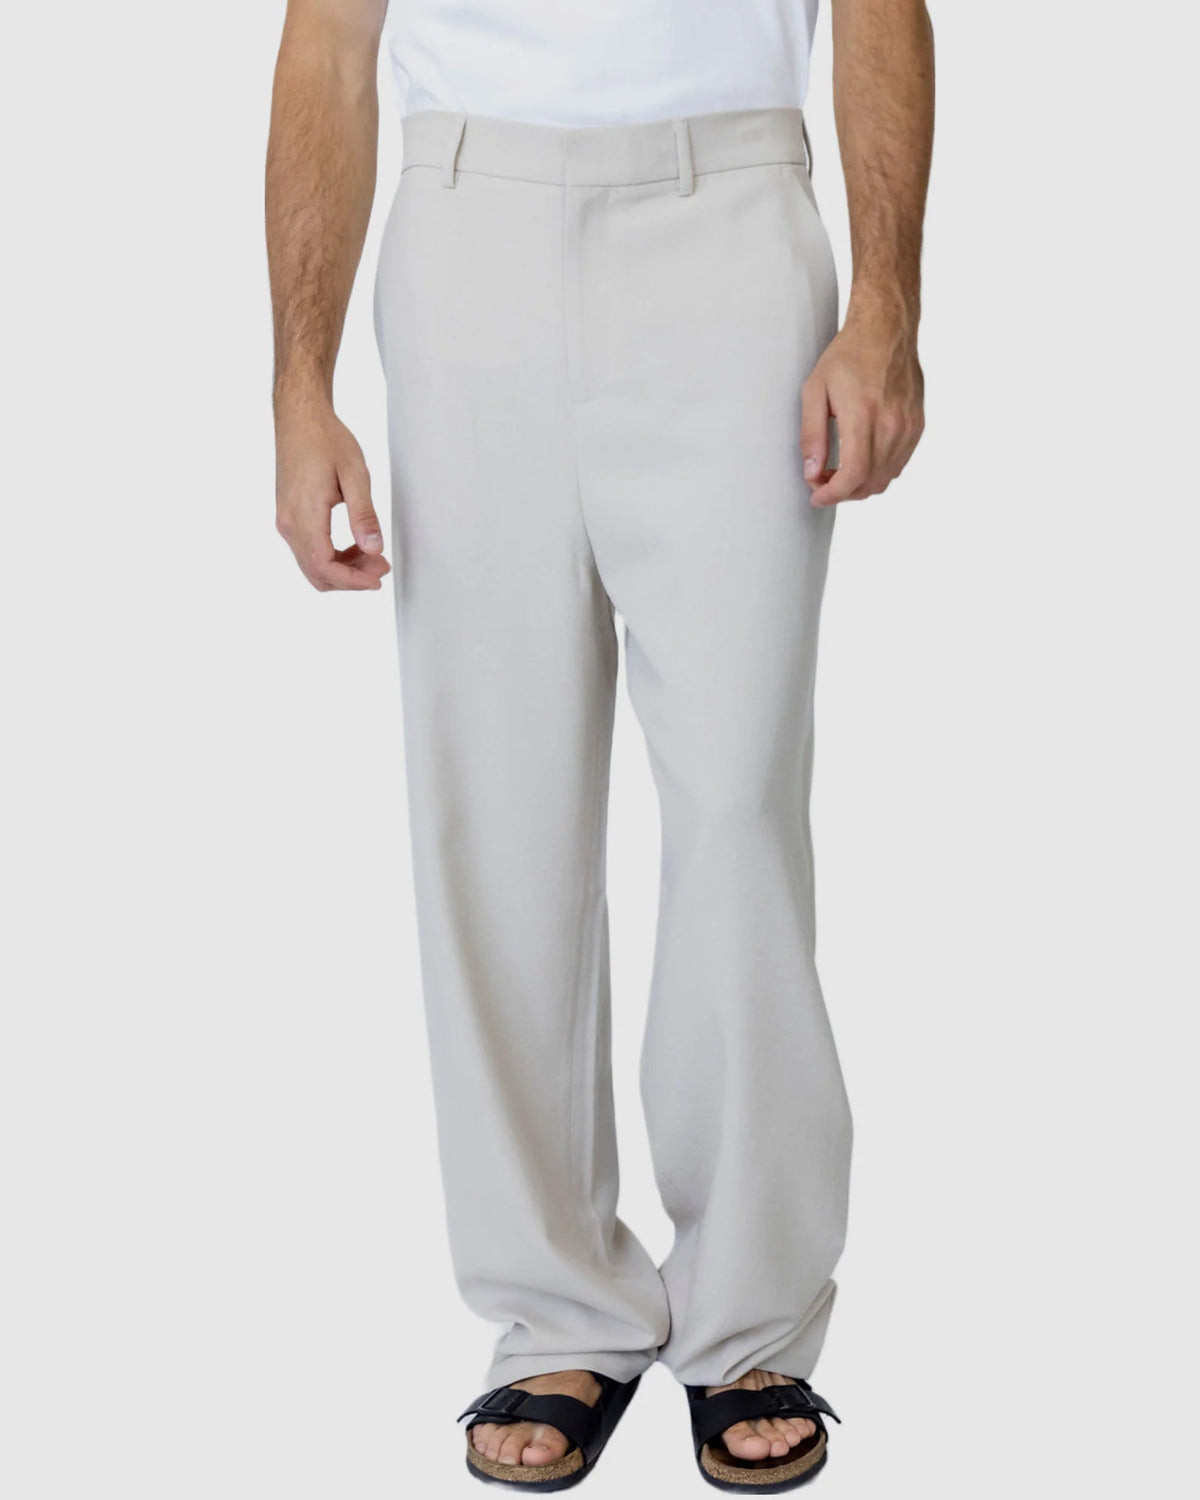 Justin Cassin Reagan Straight Leg Pants in Beige Color